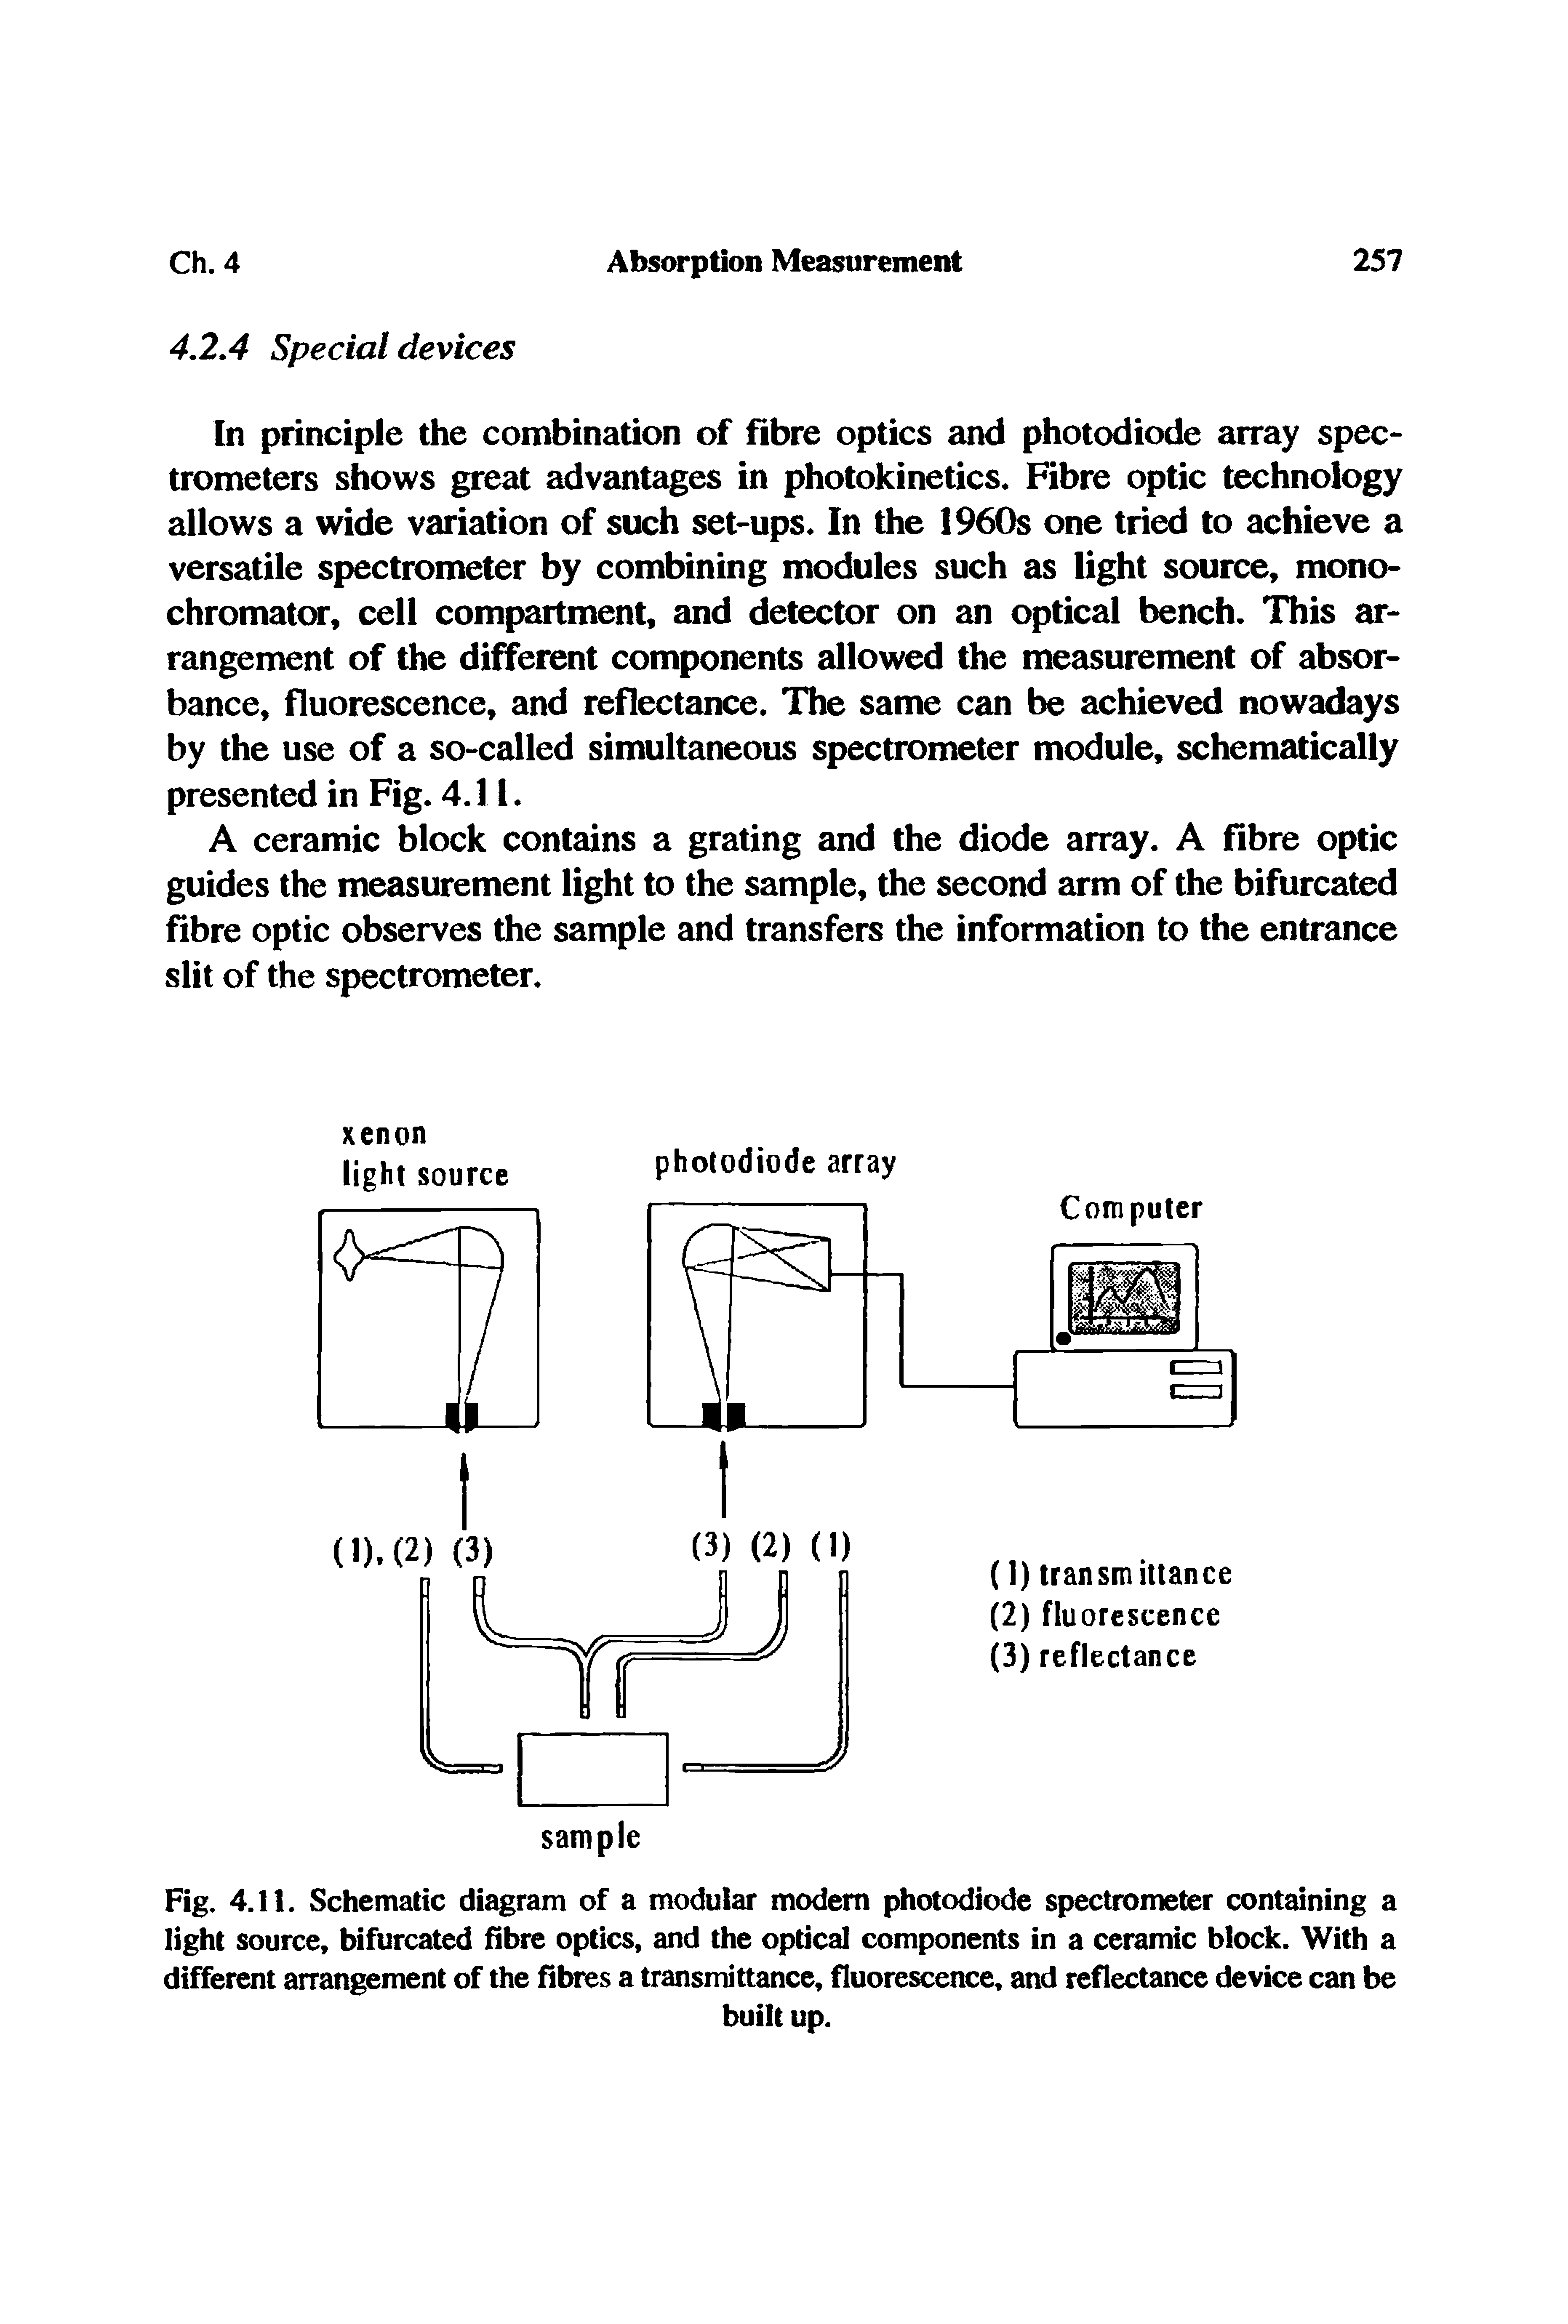 Fig. 4.11. Schematic diagram of a modular modem photodiode spectrometer containing a light source, bifurcated fibre optics, and the optical components in a ceramic block. With a different arrangement of the fibres a transmittance, fluorescence, and reflectance device can be...